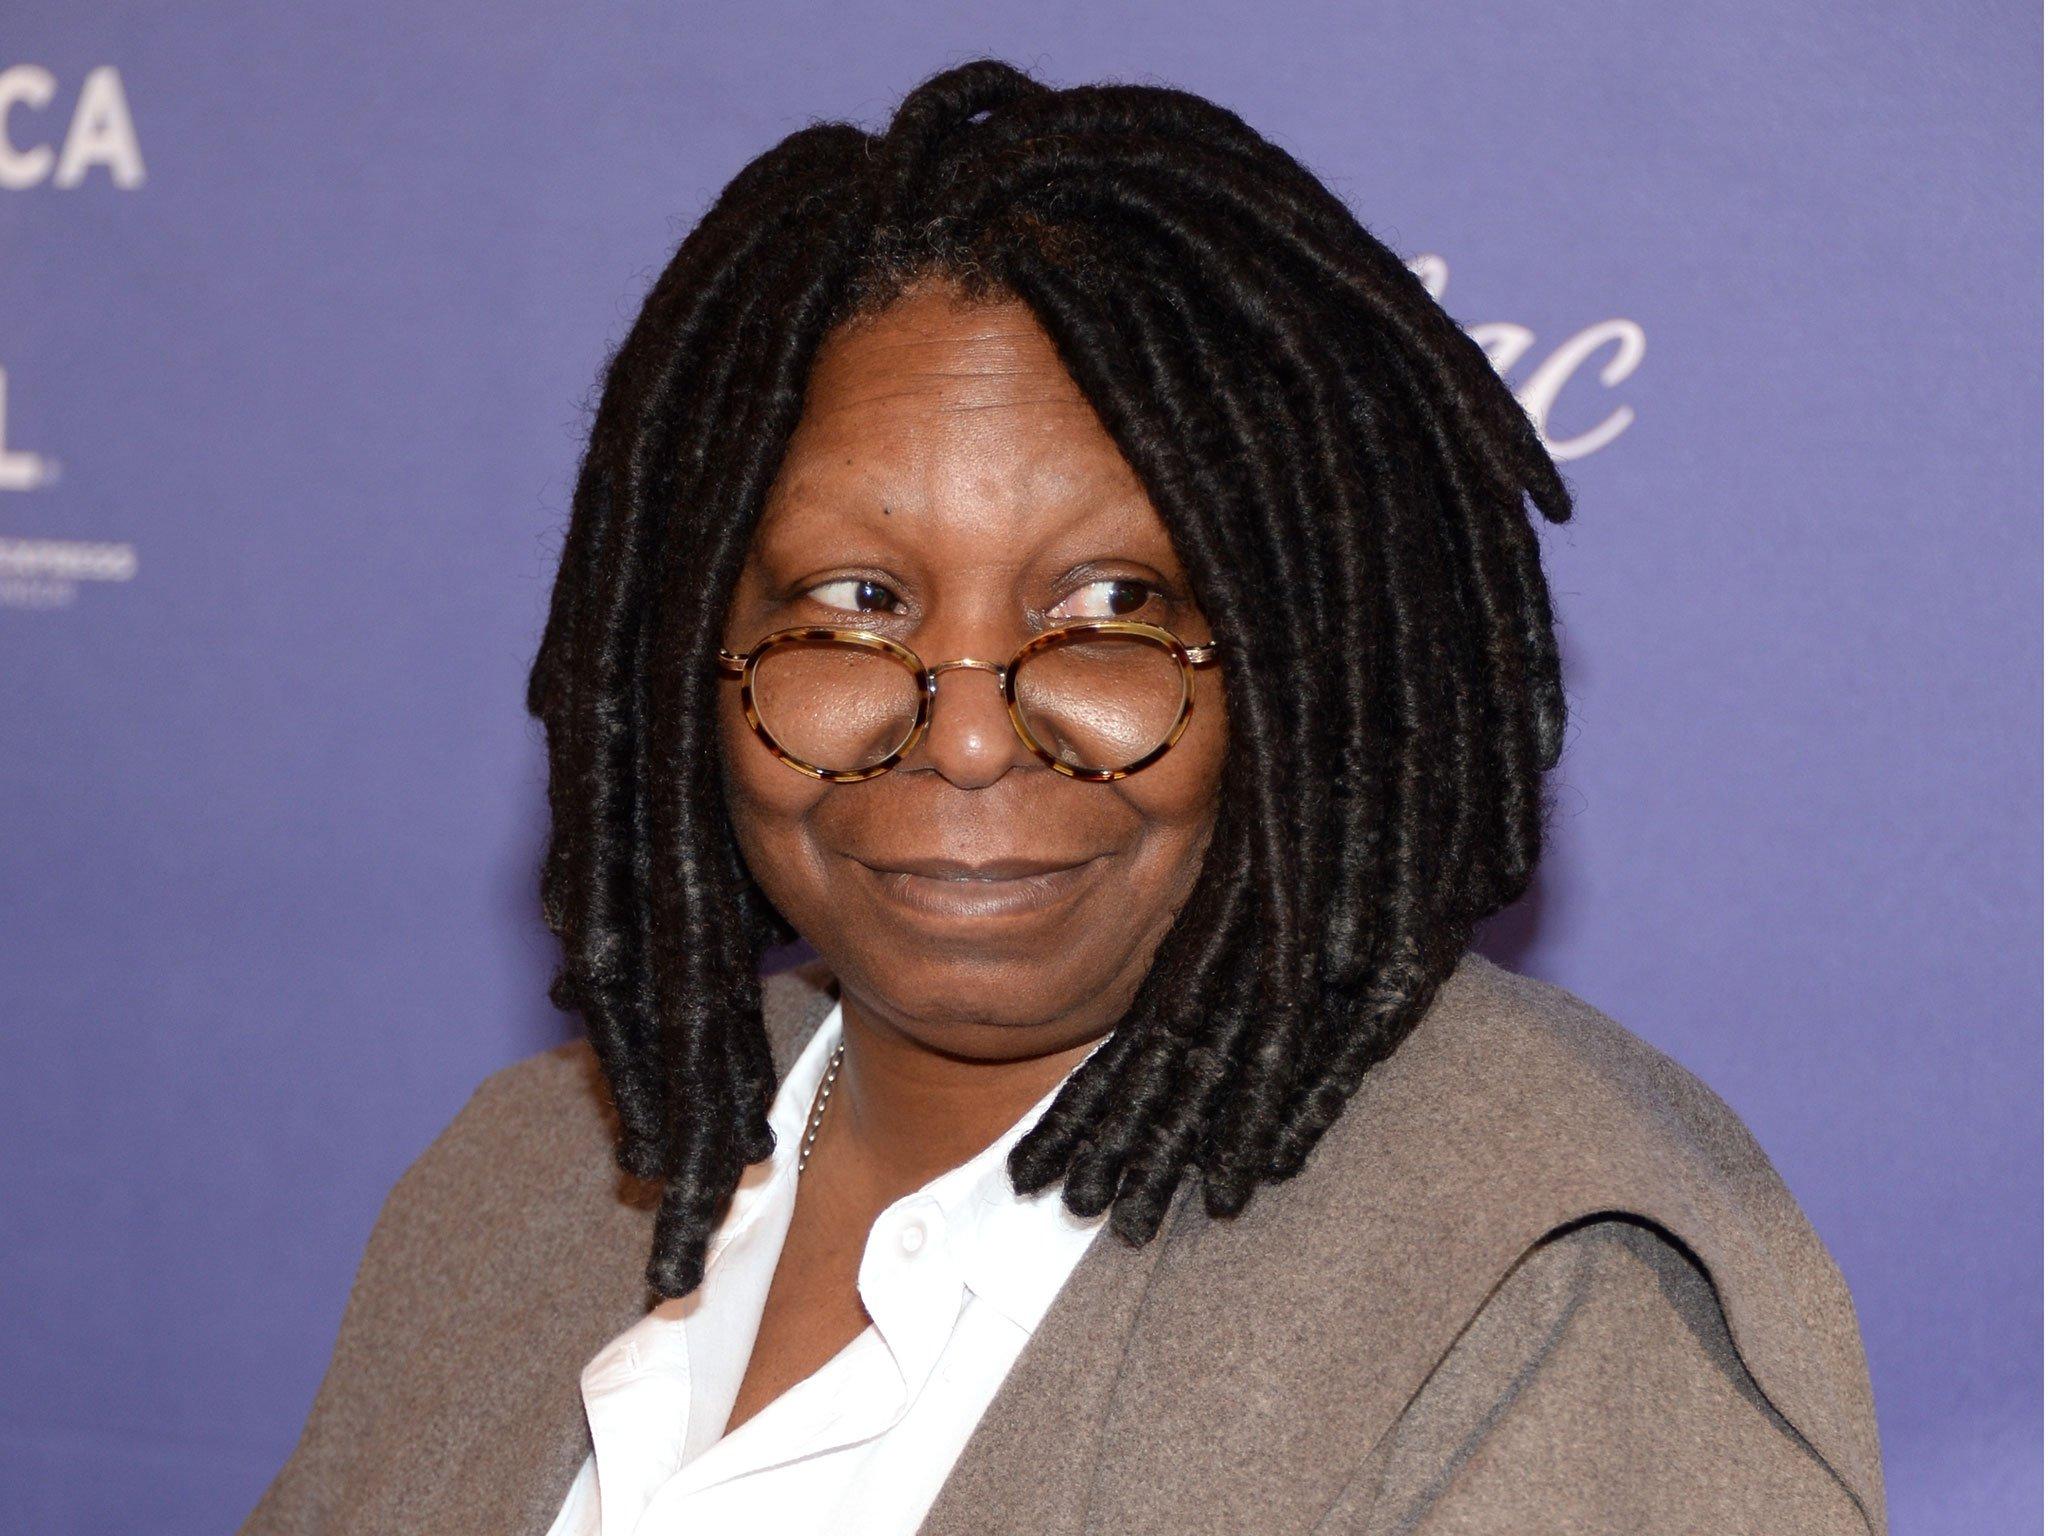 Whoopi Goldberg defends Bill Cosby over rape allegations: ‘I have a